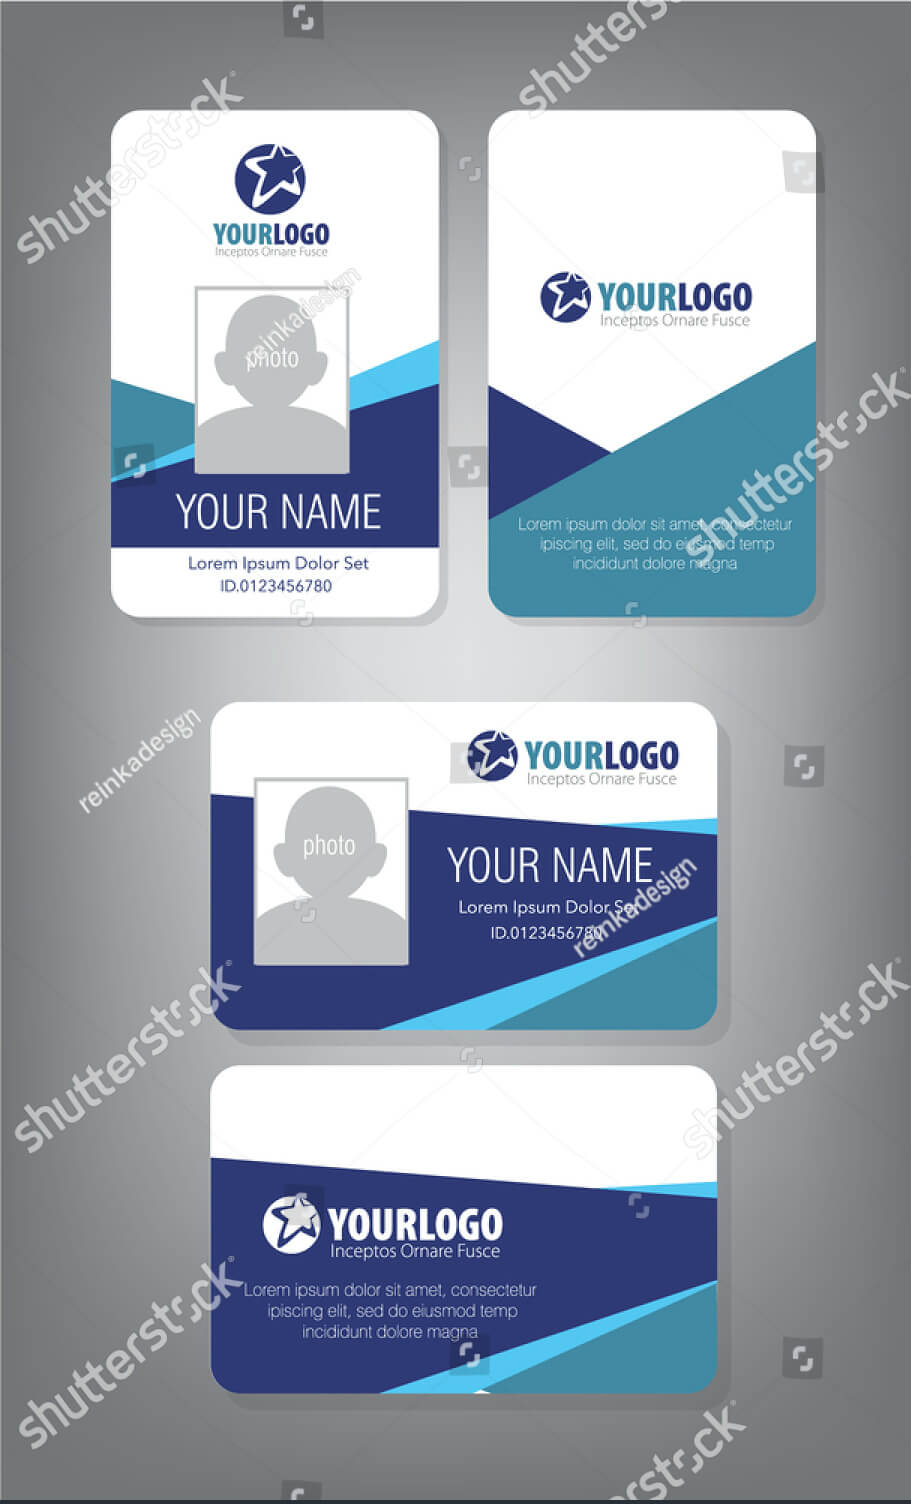 43+ Professional Id Card Designs – Psd, Eps, Ai, Word | Free Pertaining To Portrait Id Card Template